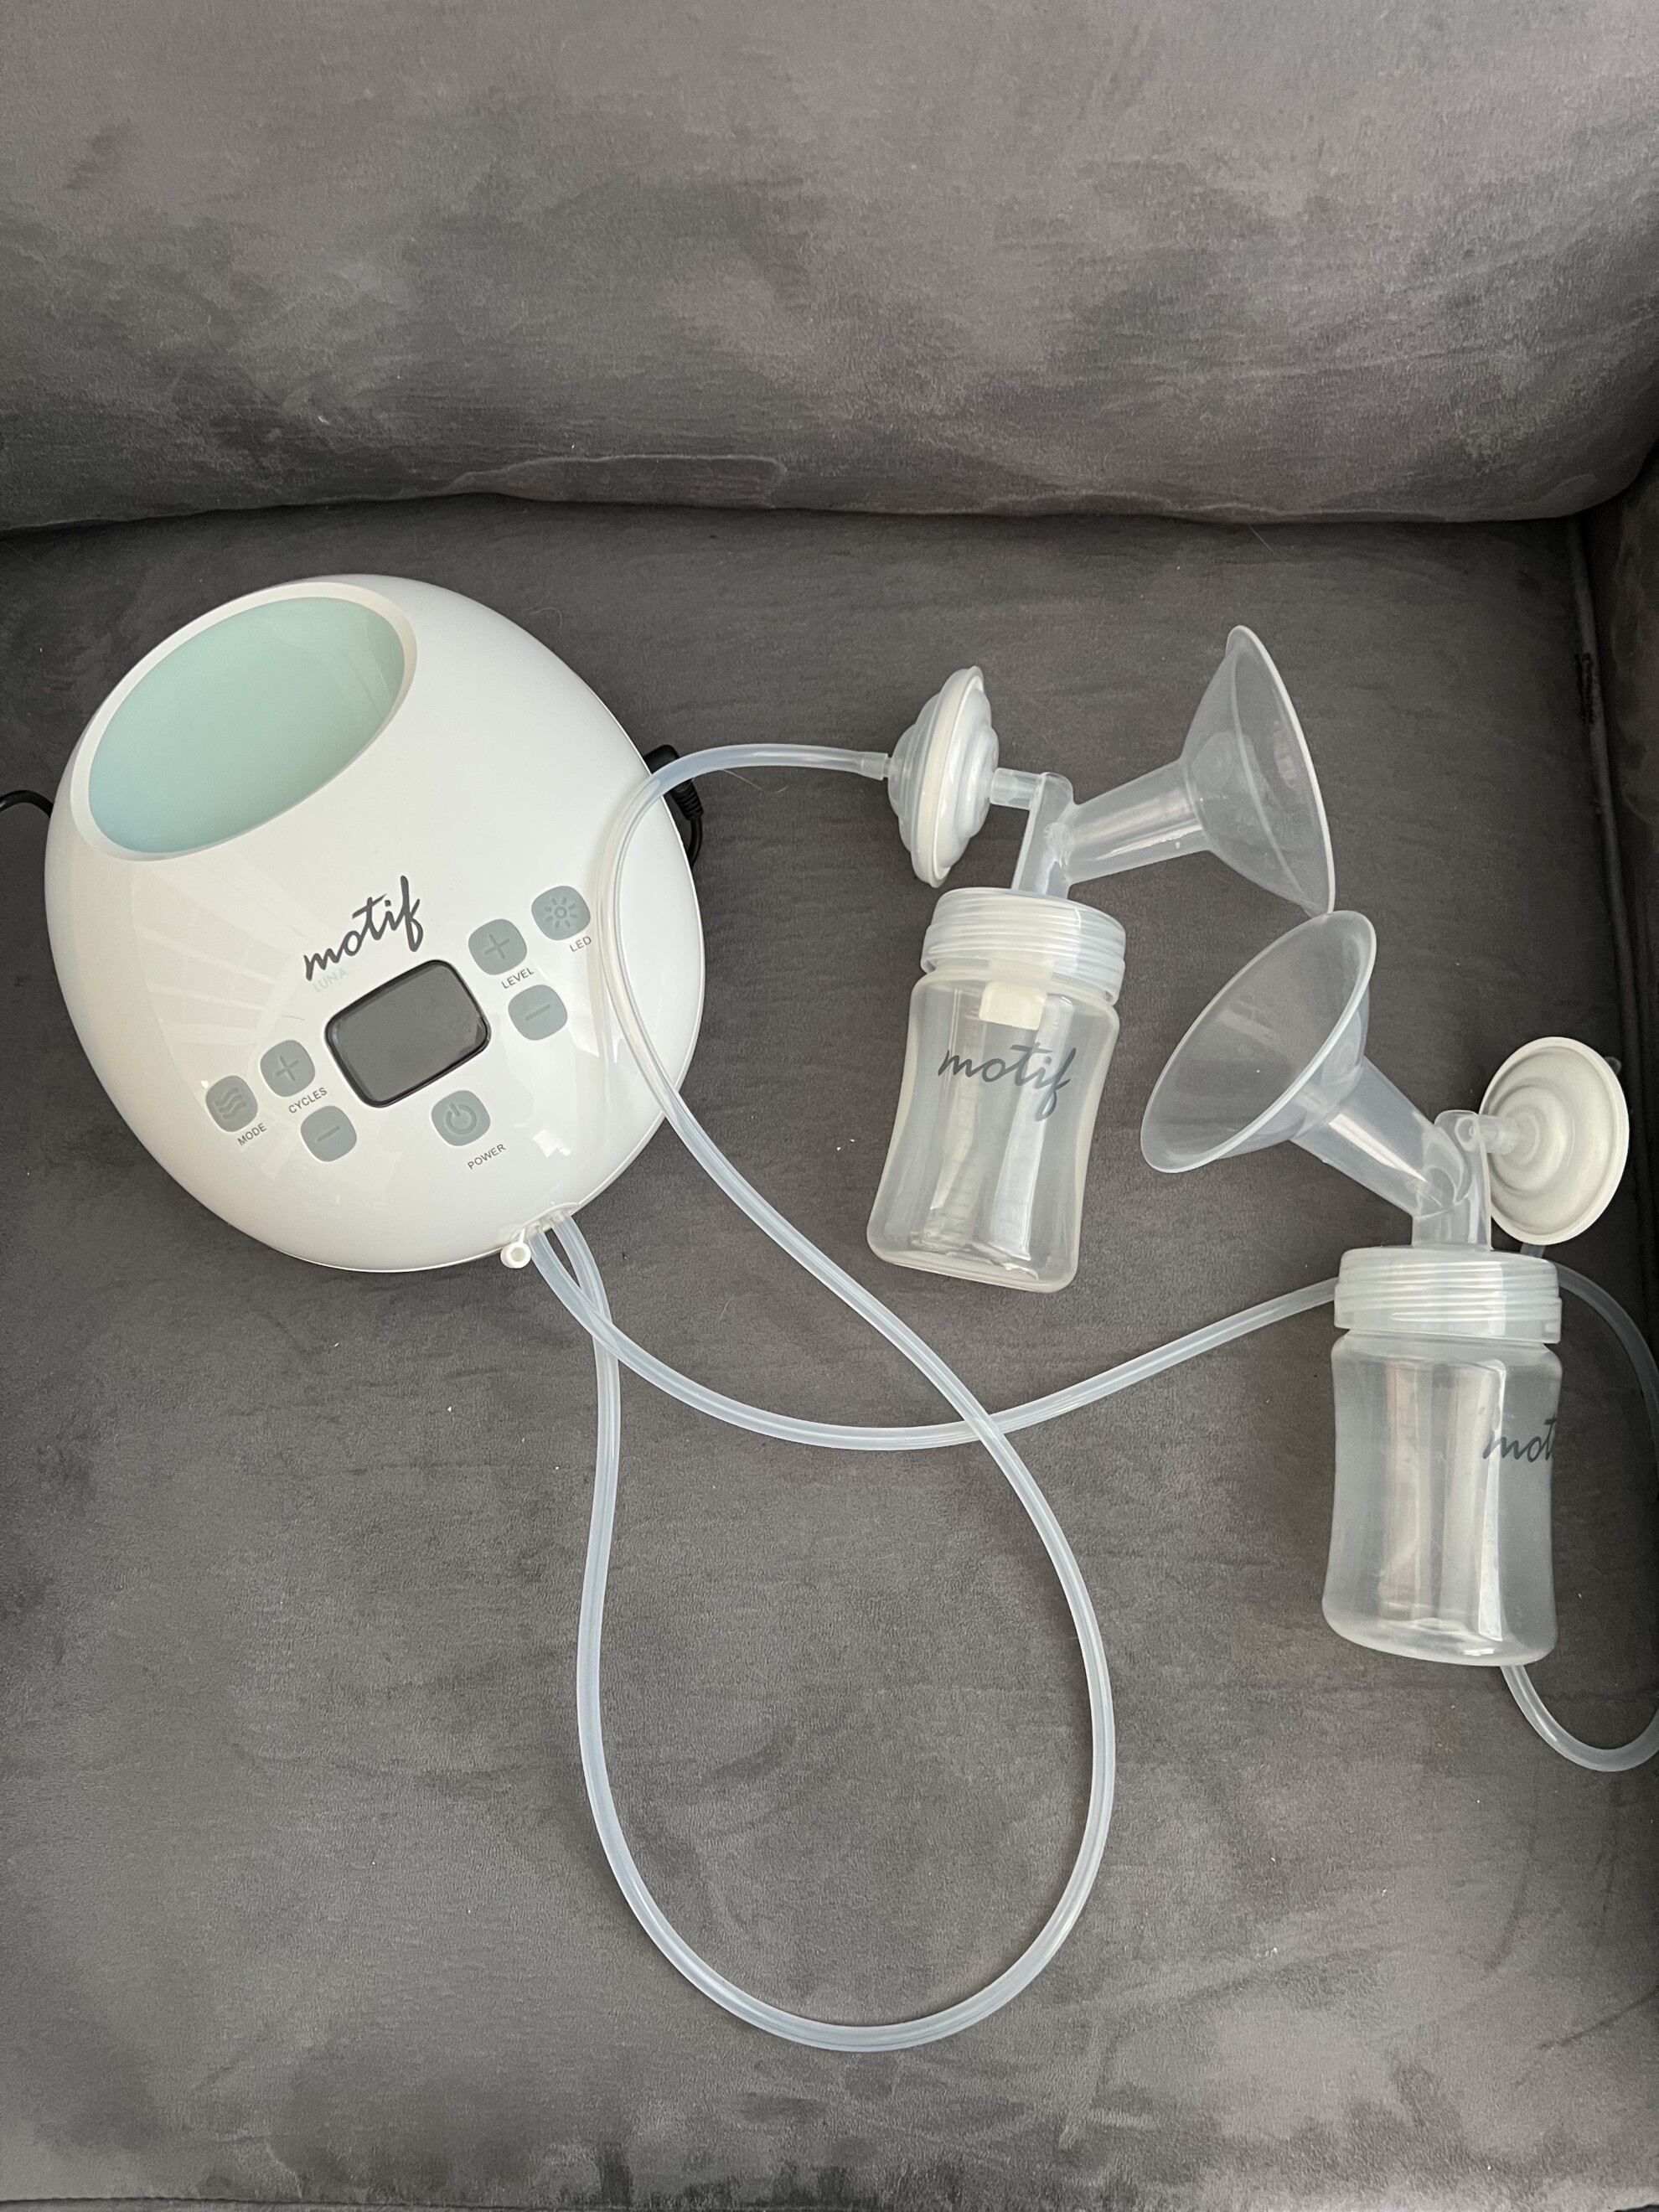 Motif Medical Luna Breast Pump Review & My Pumping Routine - The